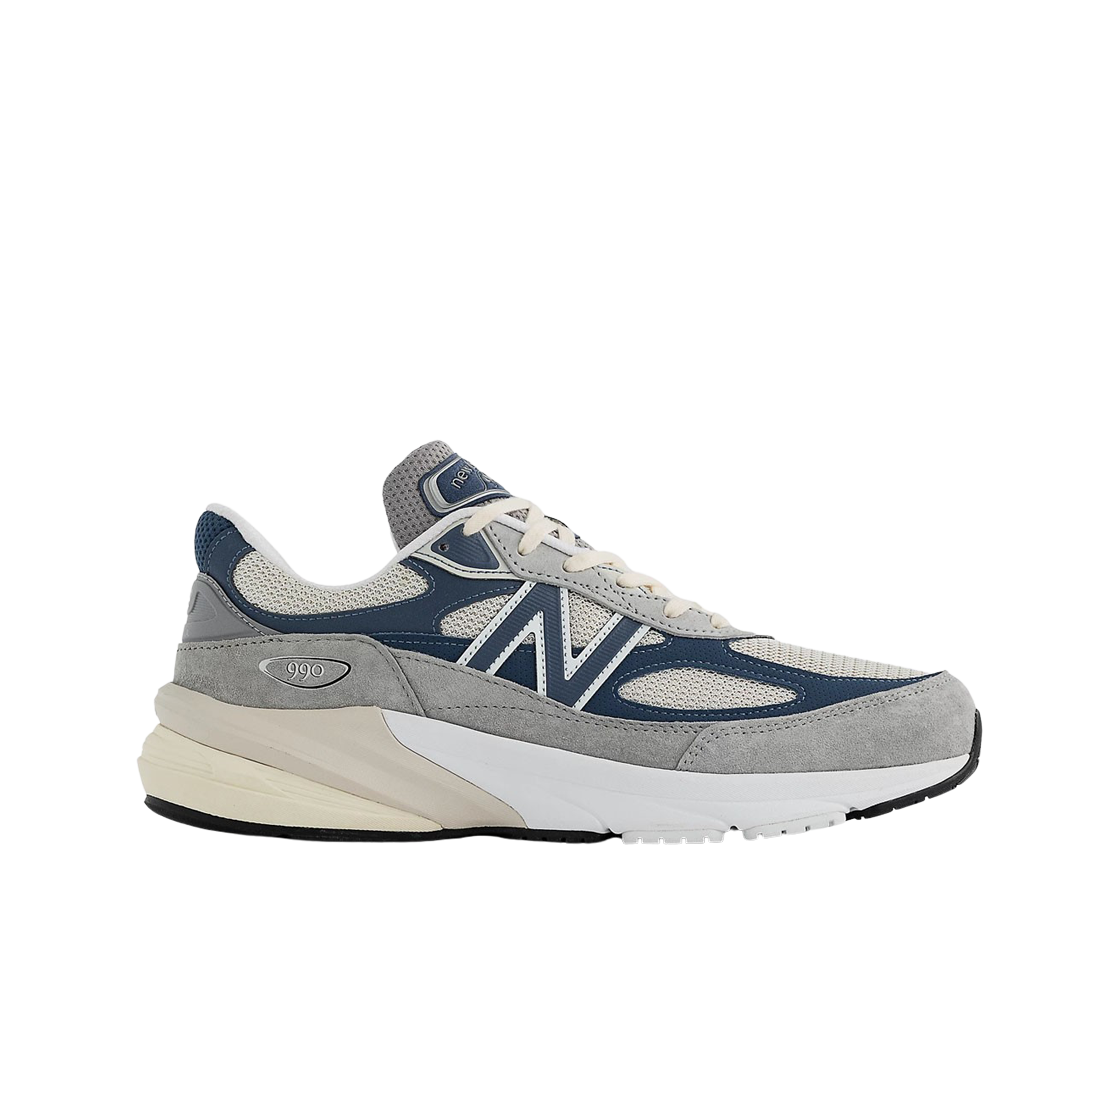 New Balance 990v6 Made in USA Gray Suede